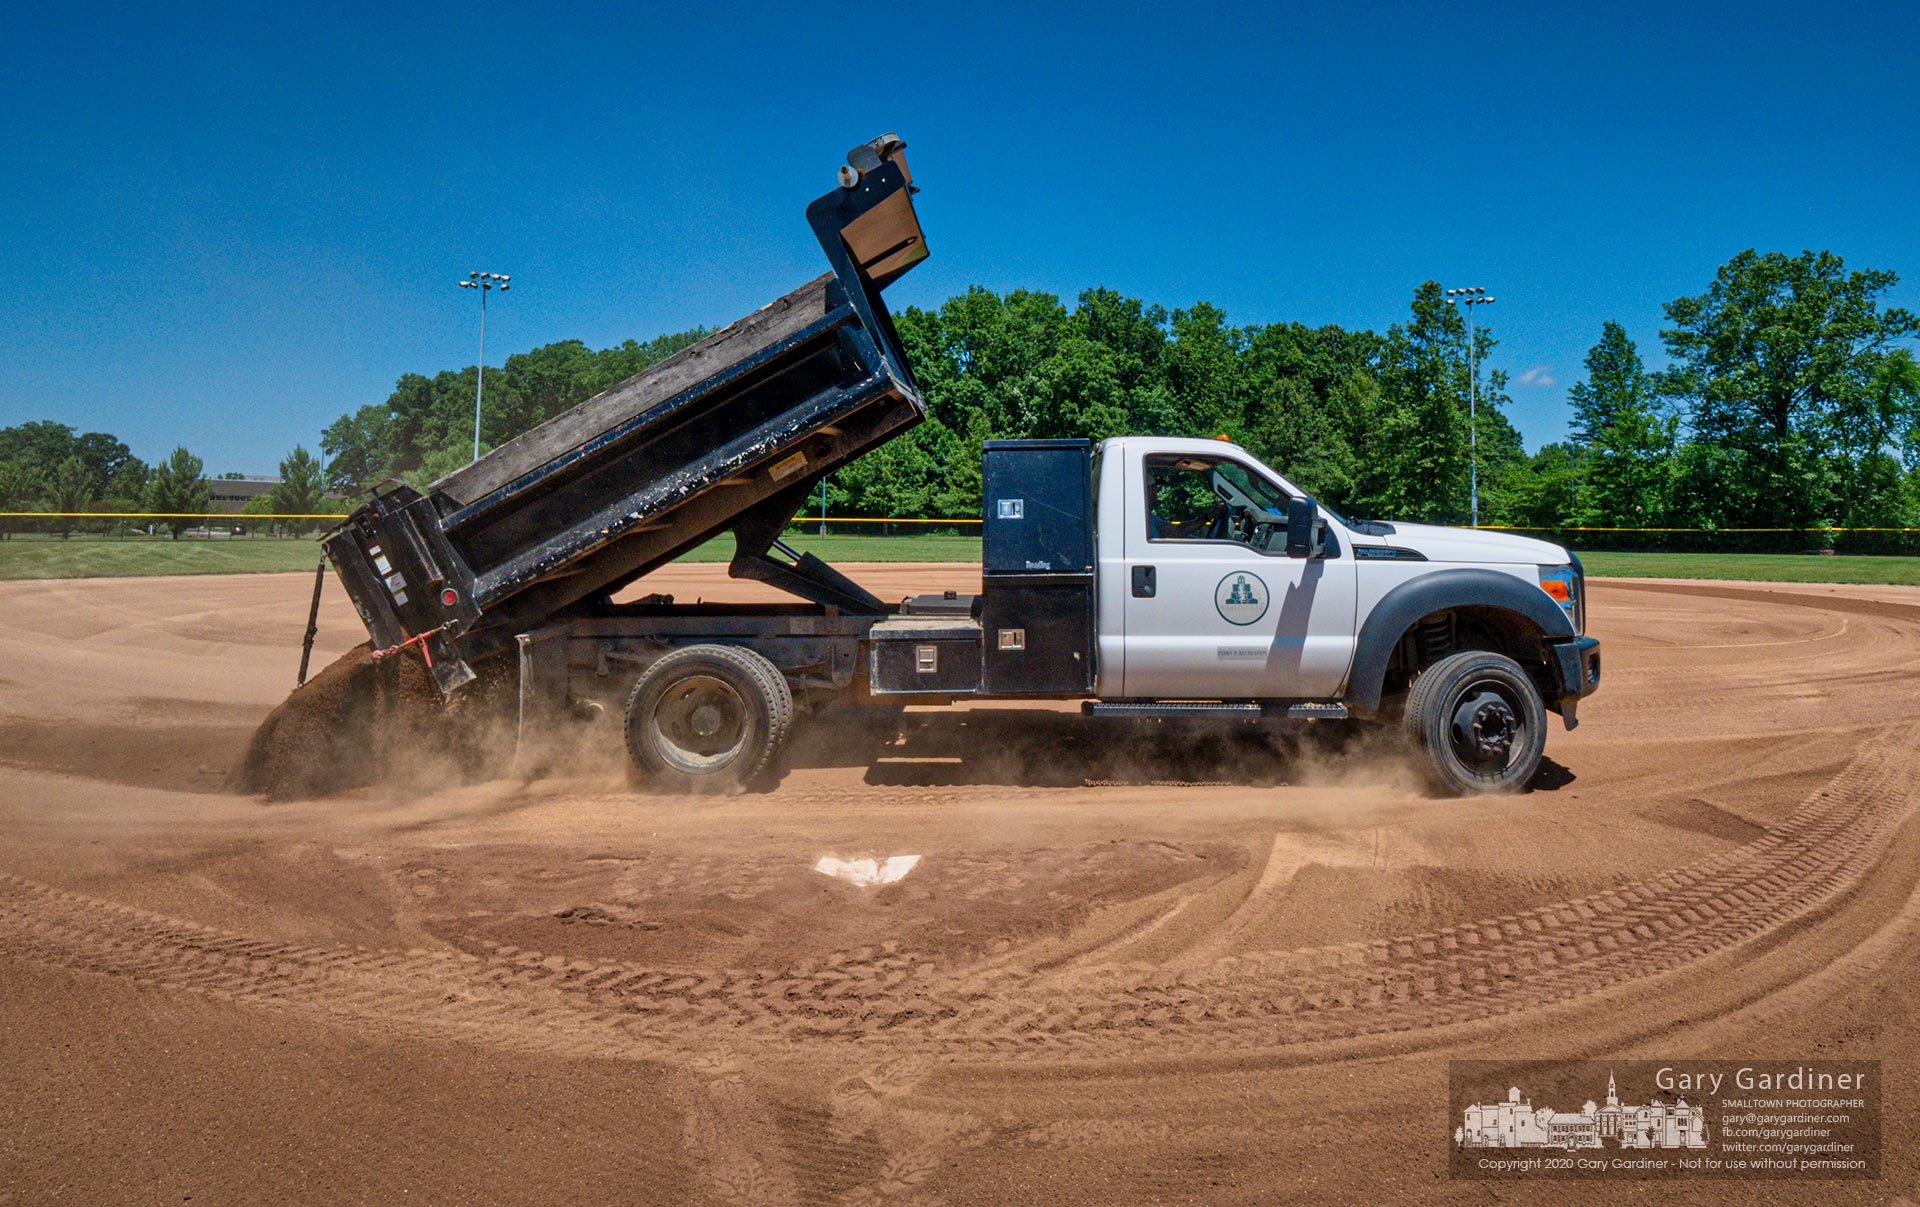 A Westerville Parks and Recreation crew spreads infield dirt on the fields at Hoff Woods Park as it prepares for upcoming softball tryouts and tournament. My Final Photo for July 1, 2020.